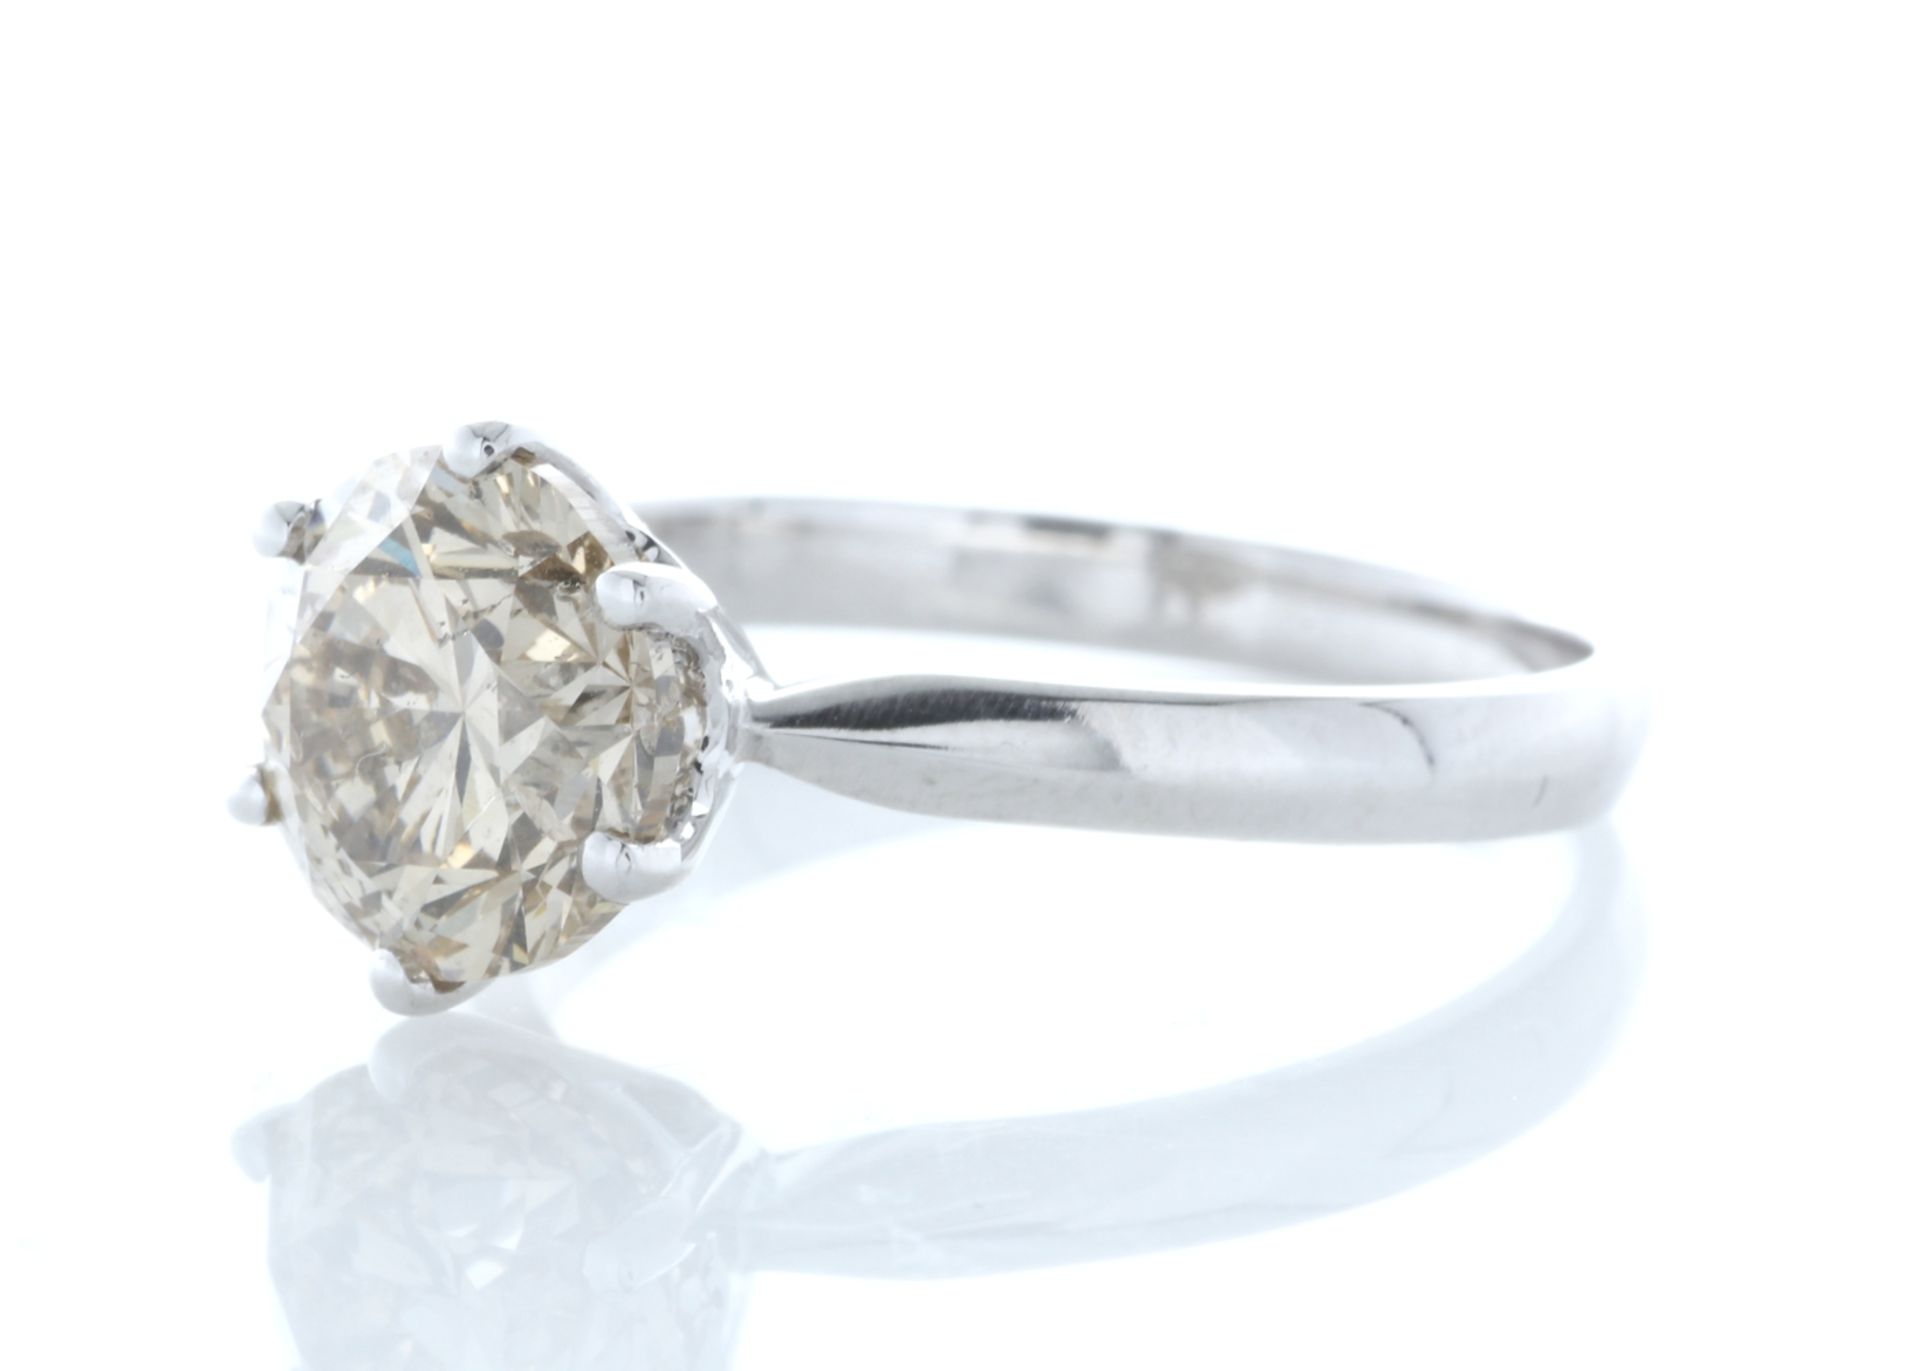 18ct White Gold Single Stone Claw Set Diamond Ring 2.58 Carats - Valued by GIE £79,955.00 - 18ct - Image 2 of 5